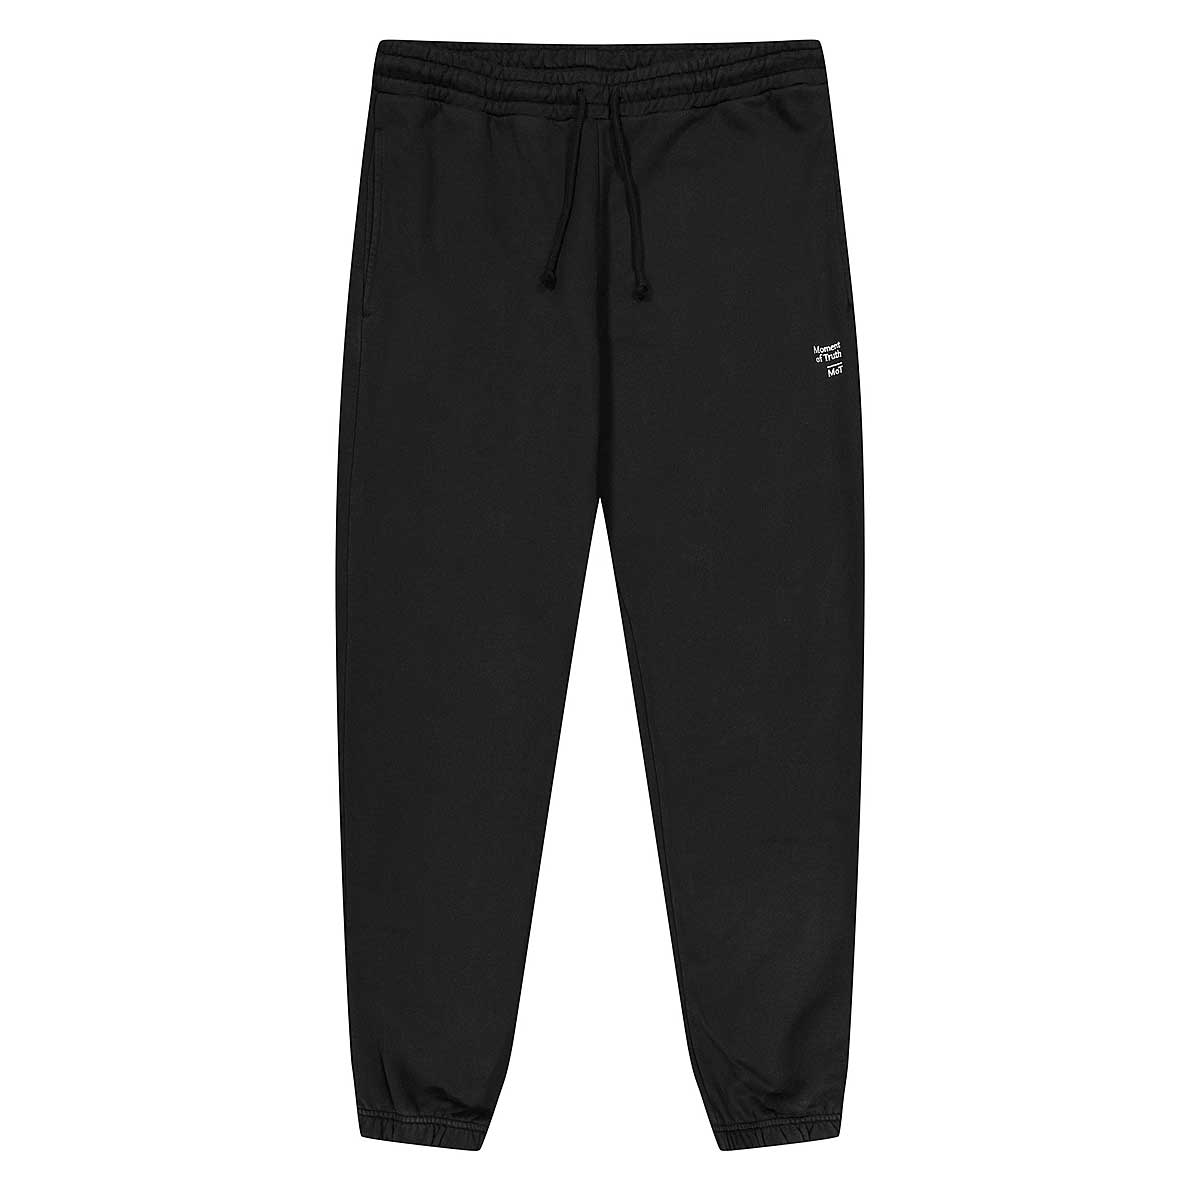 Moment Of Truth Lux Sweatpants, Black